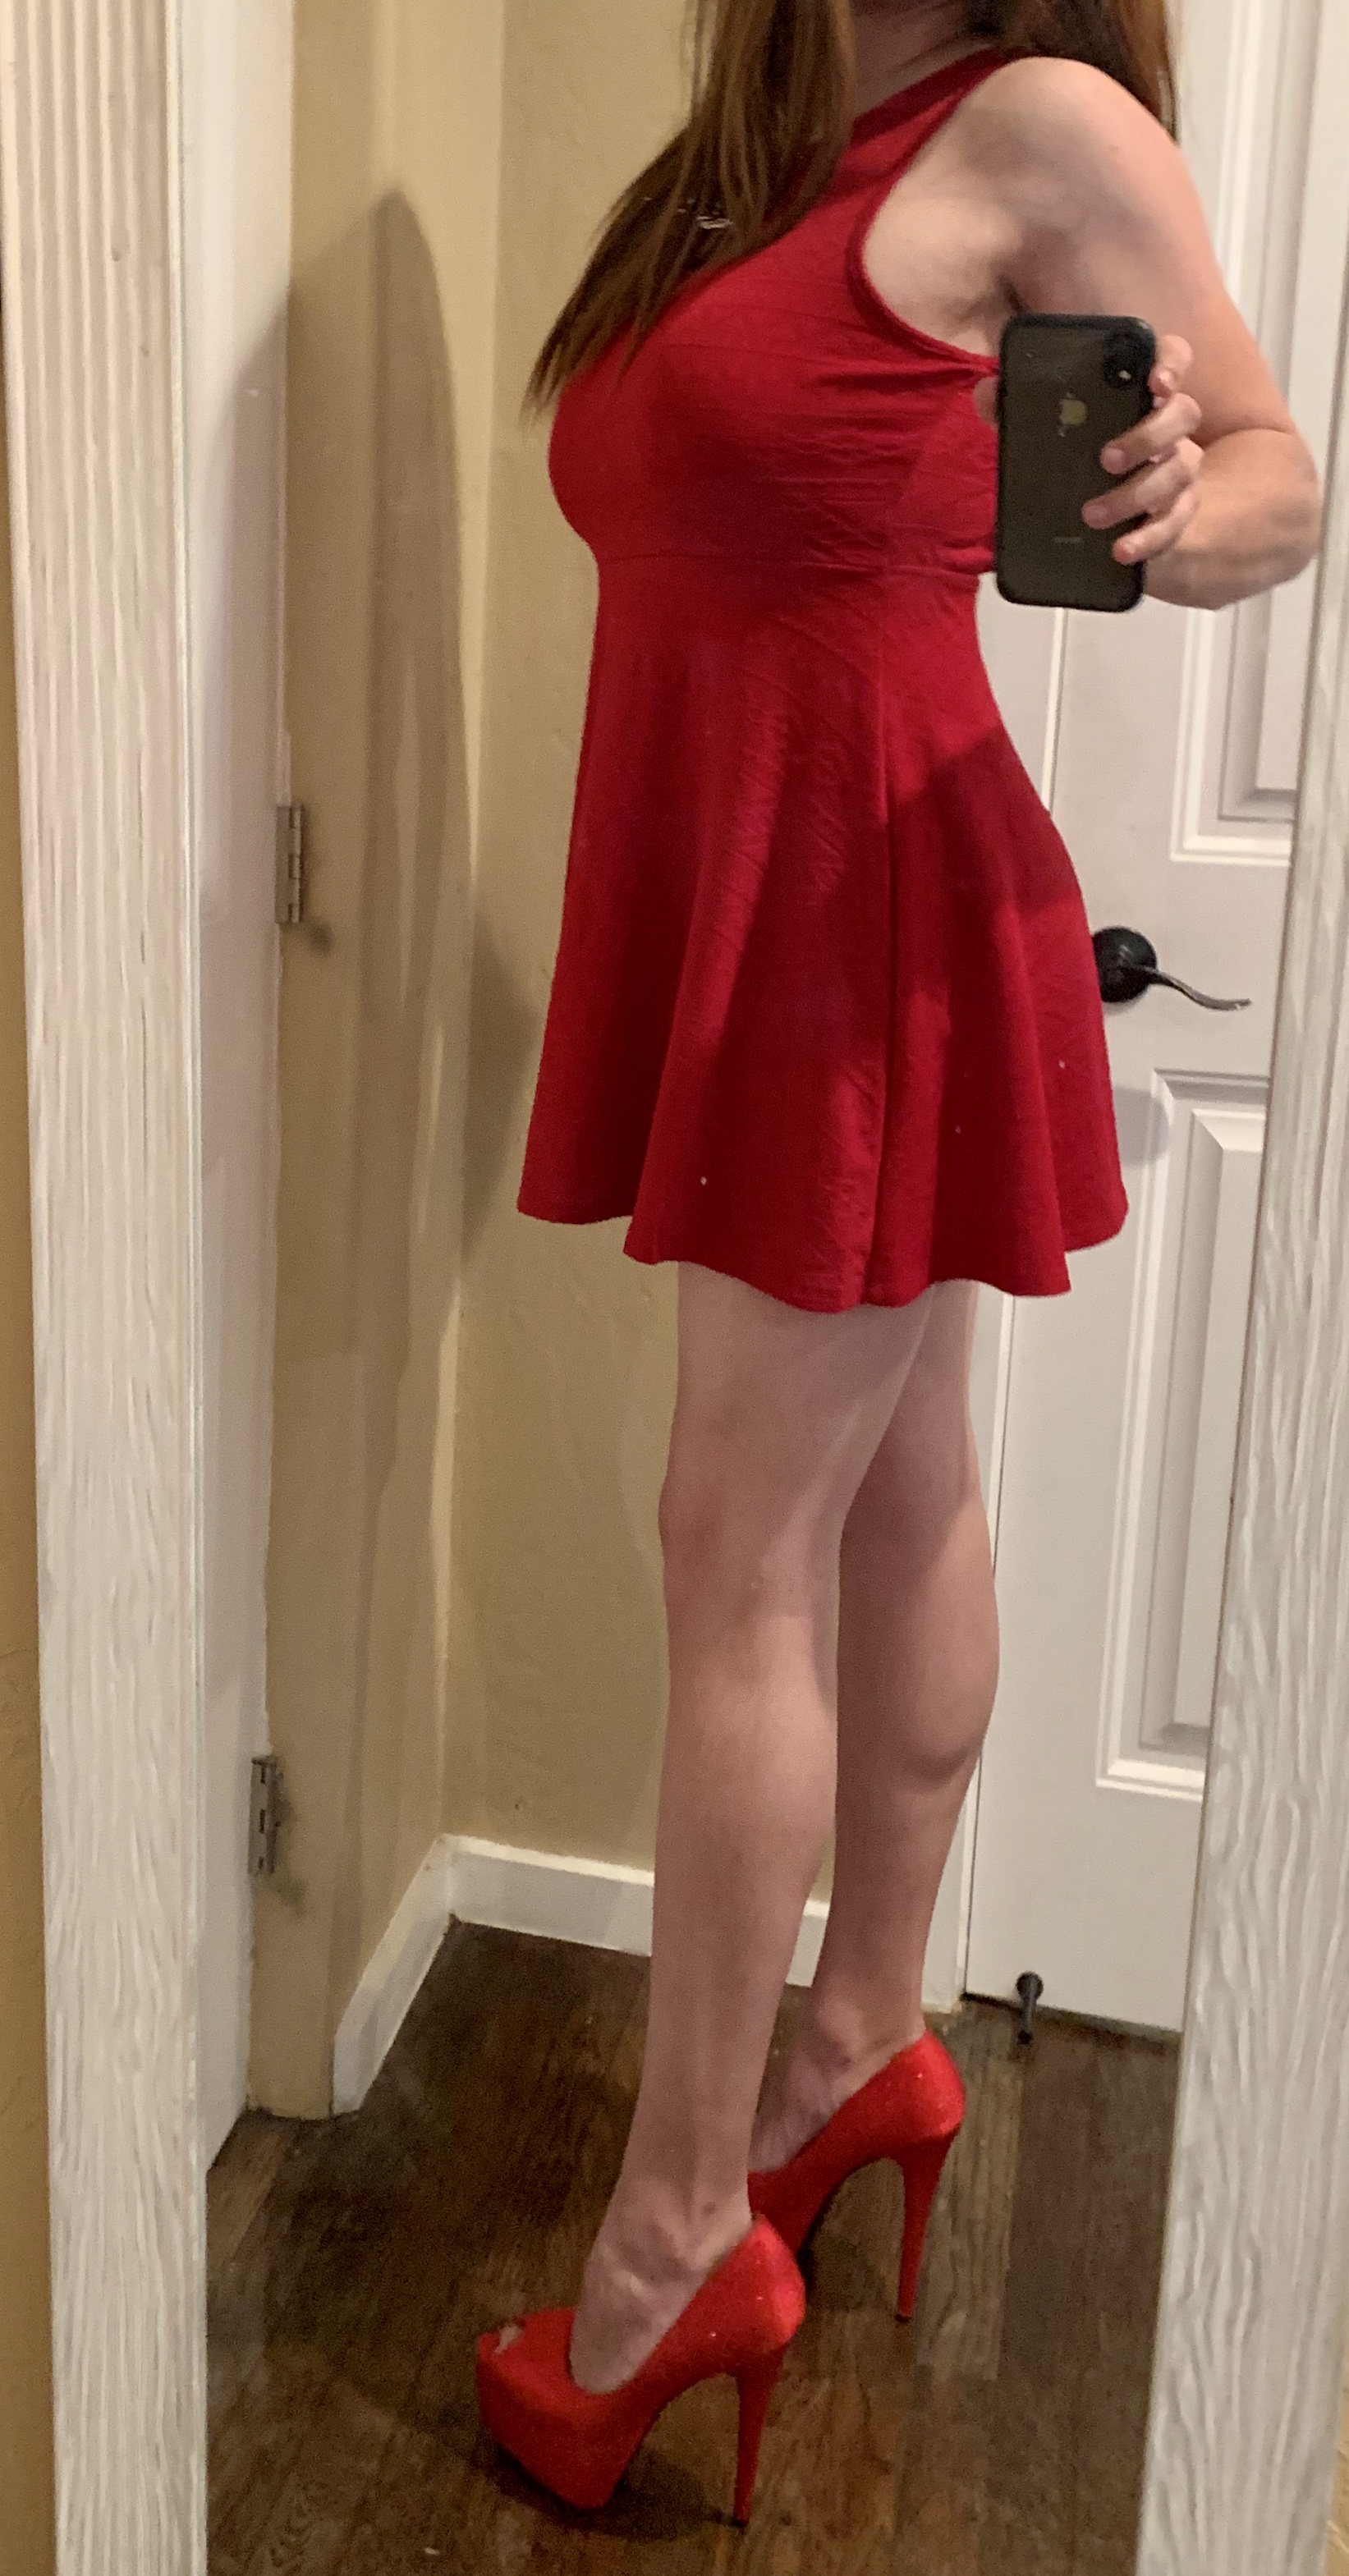 Short dresses and high heels make me feel so sexy Porn Pic - EPORNER